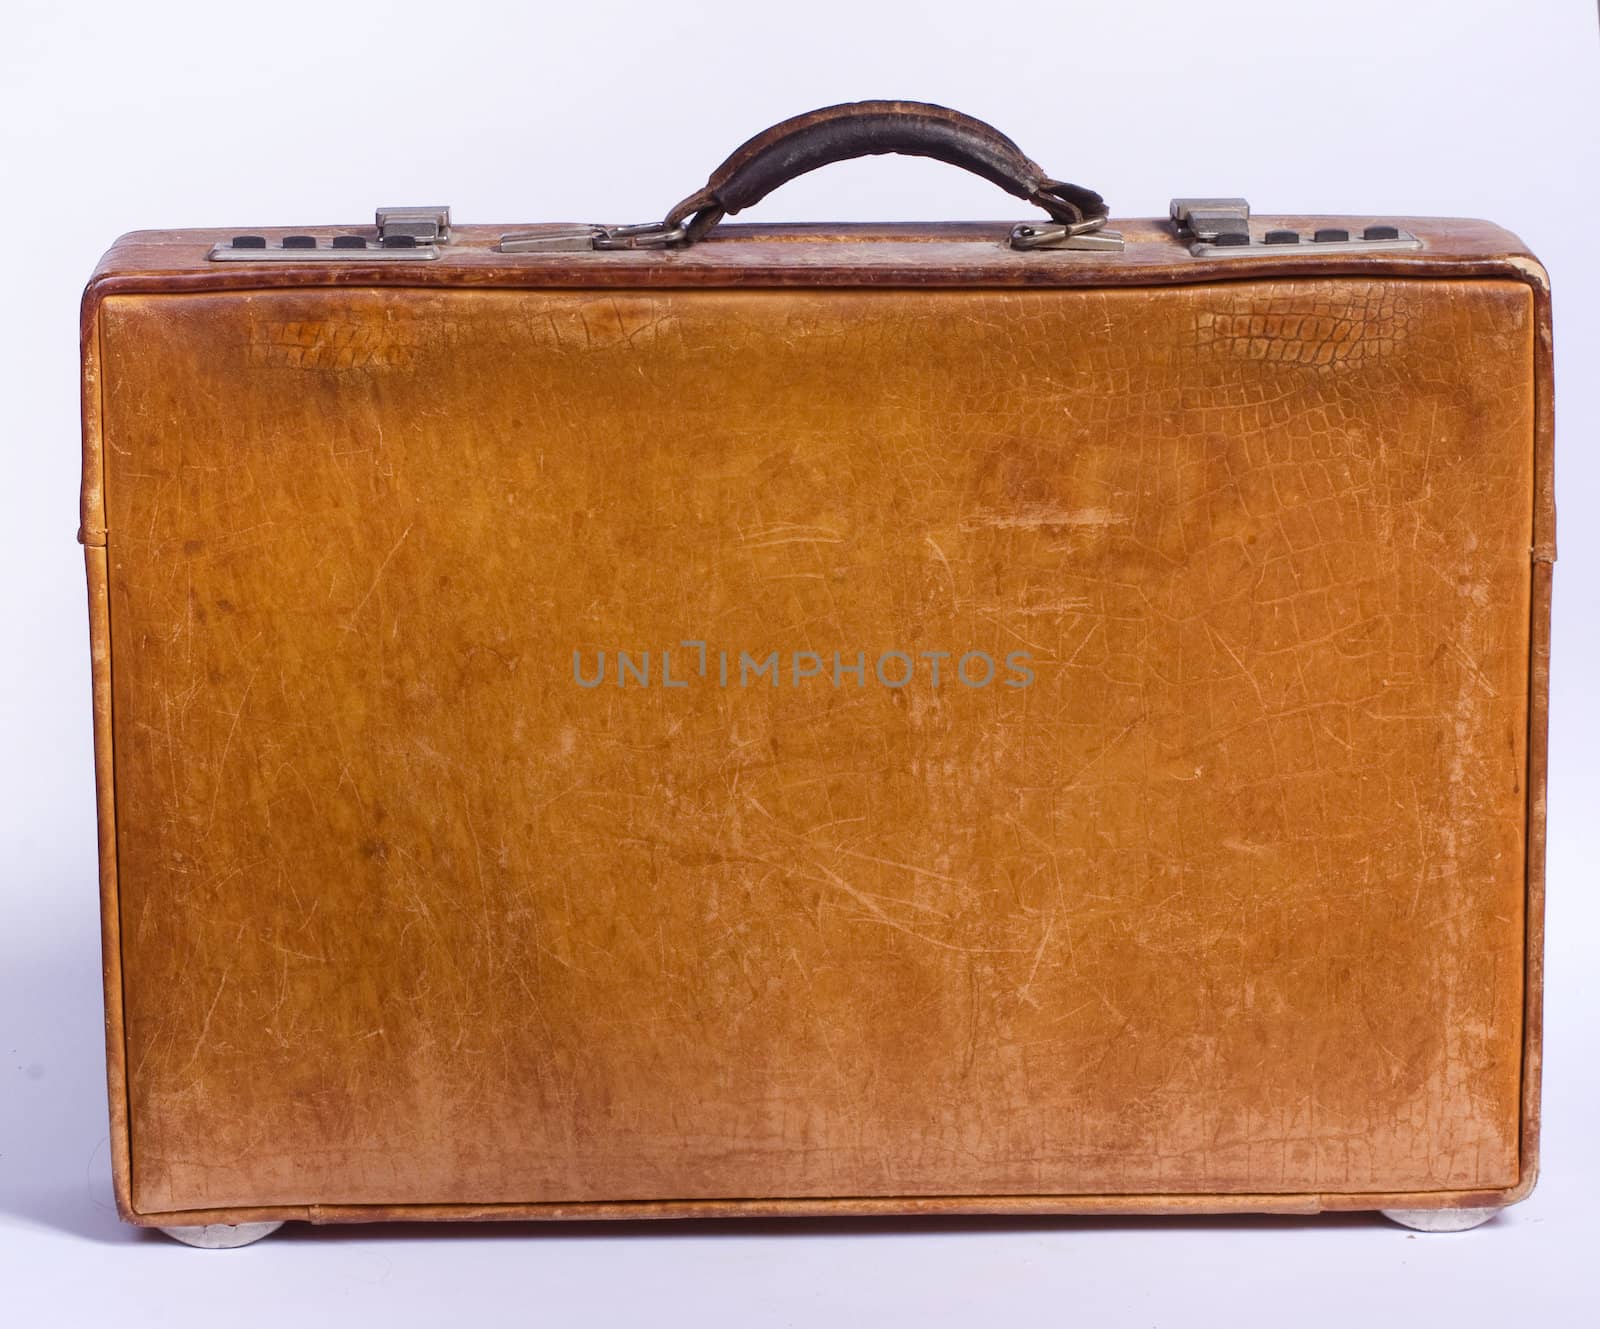 old suitcase by sarkao